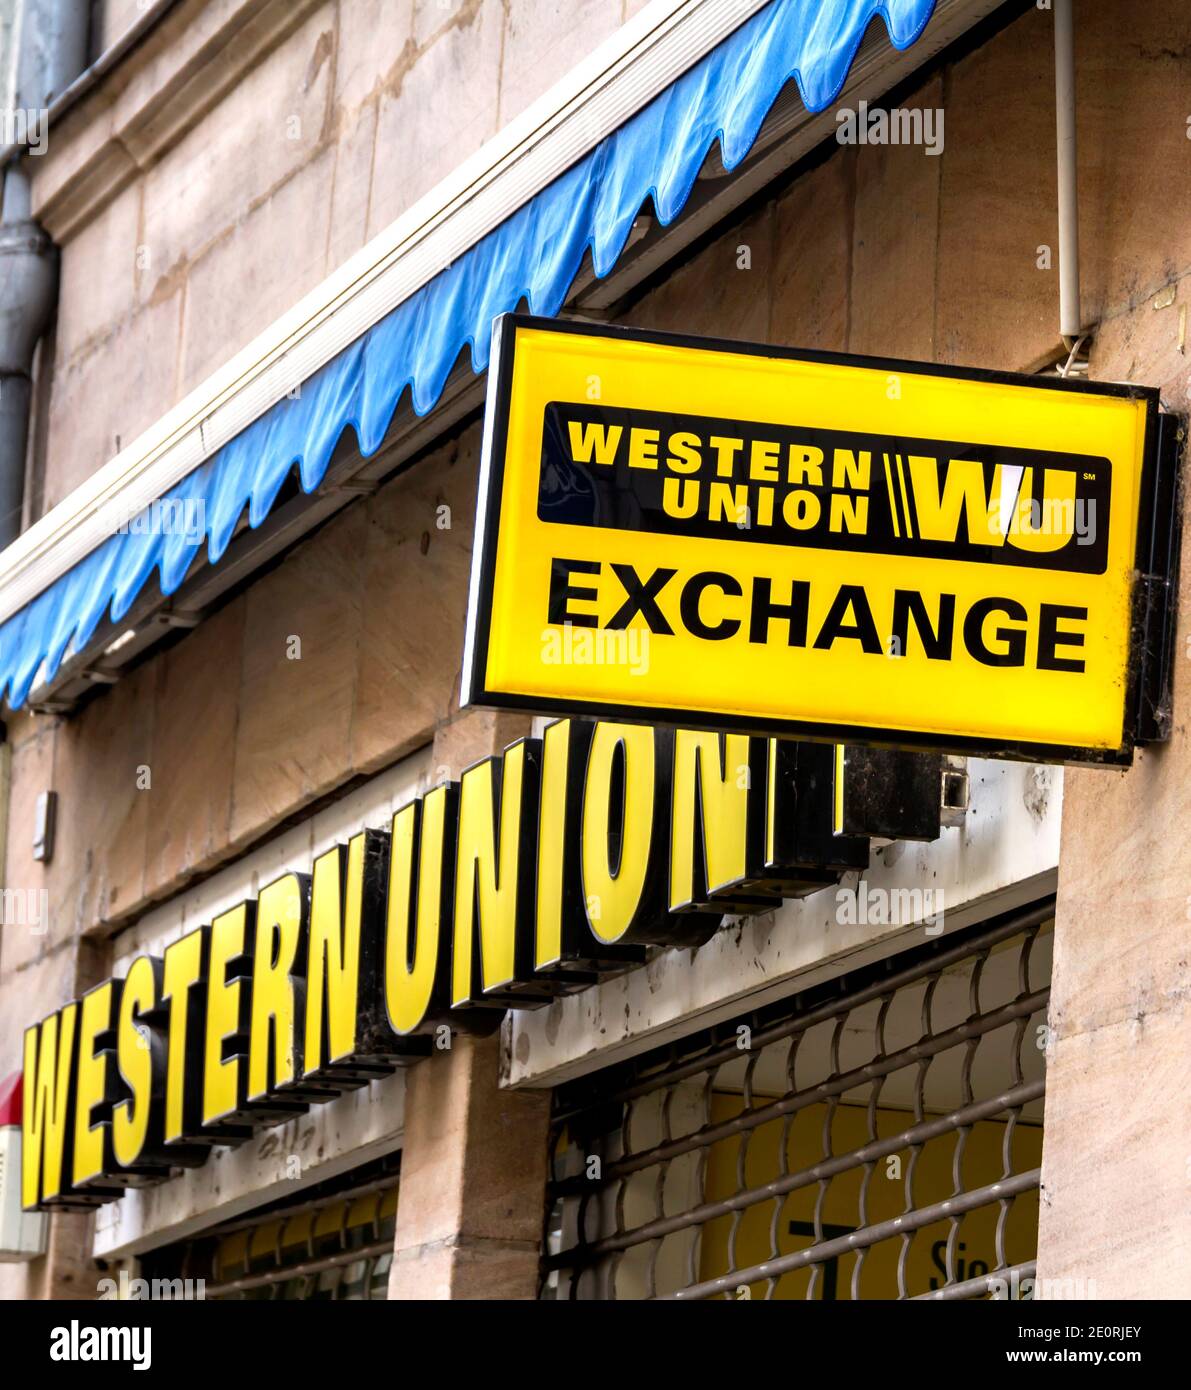 Western Union Signboard High Resolution Stock Photography and Images - Alamy